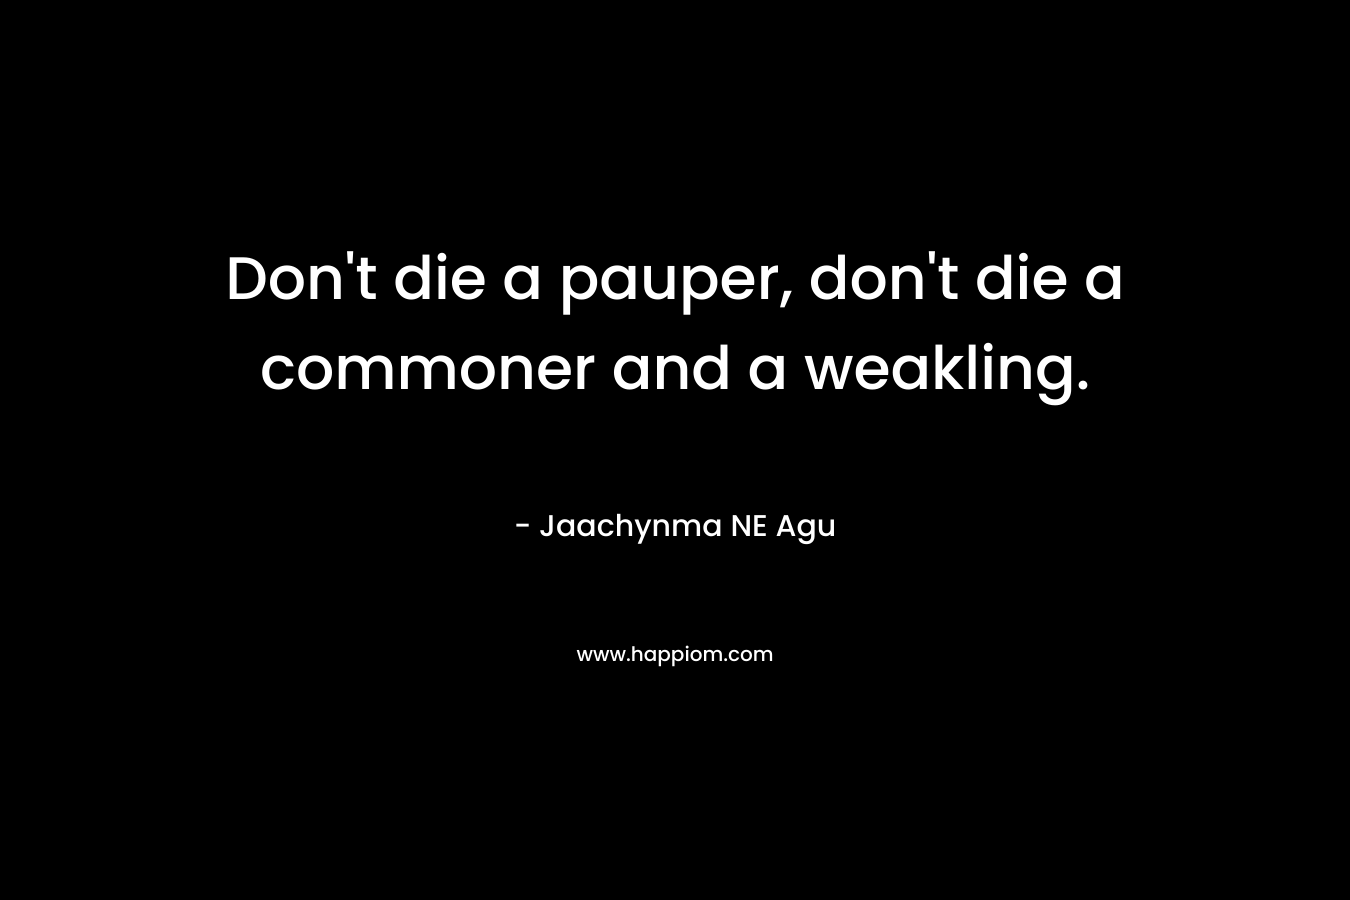 Don't die a pauper, don't die a commoner and a weakling.